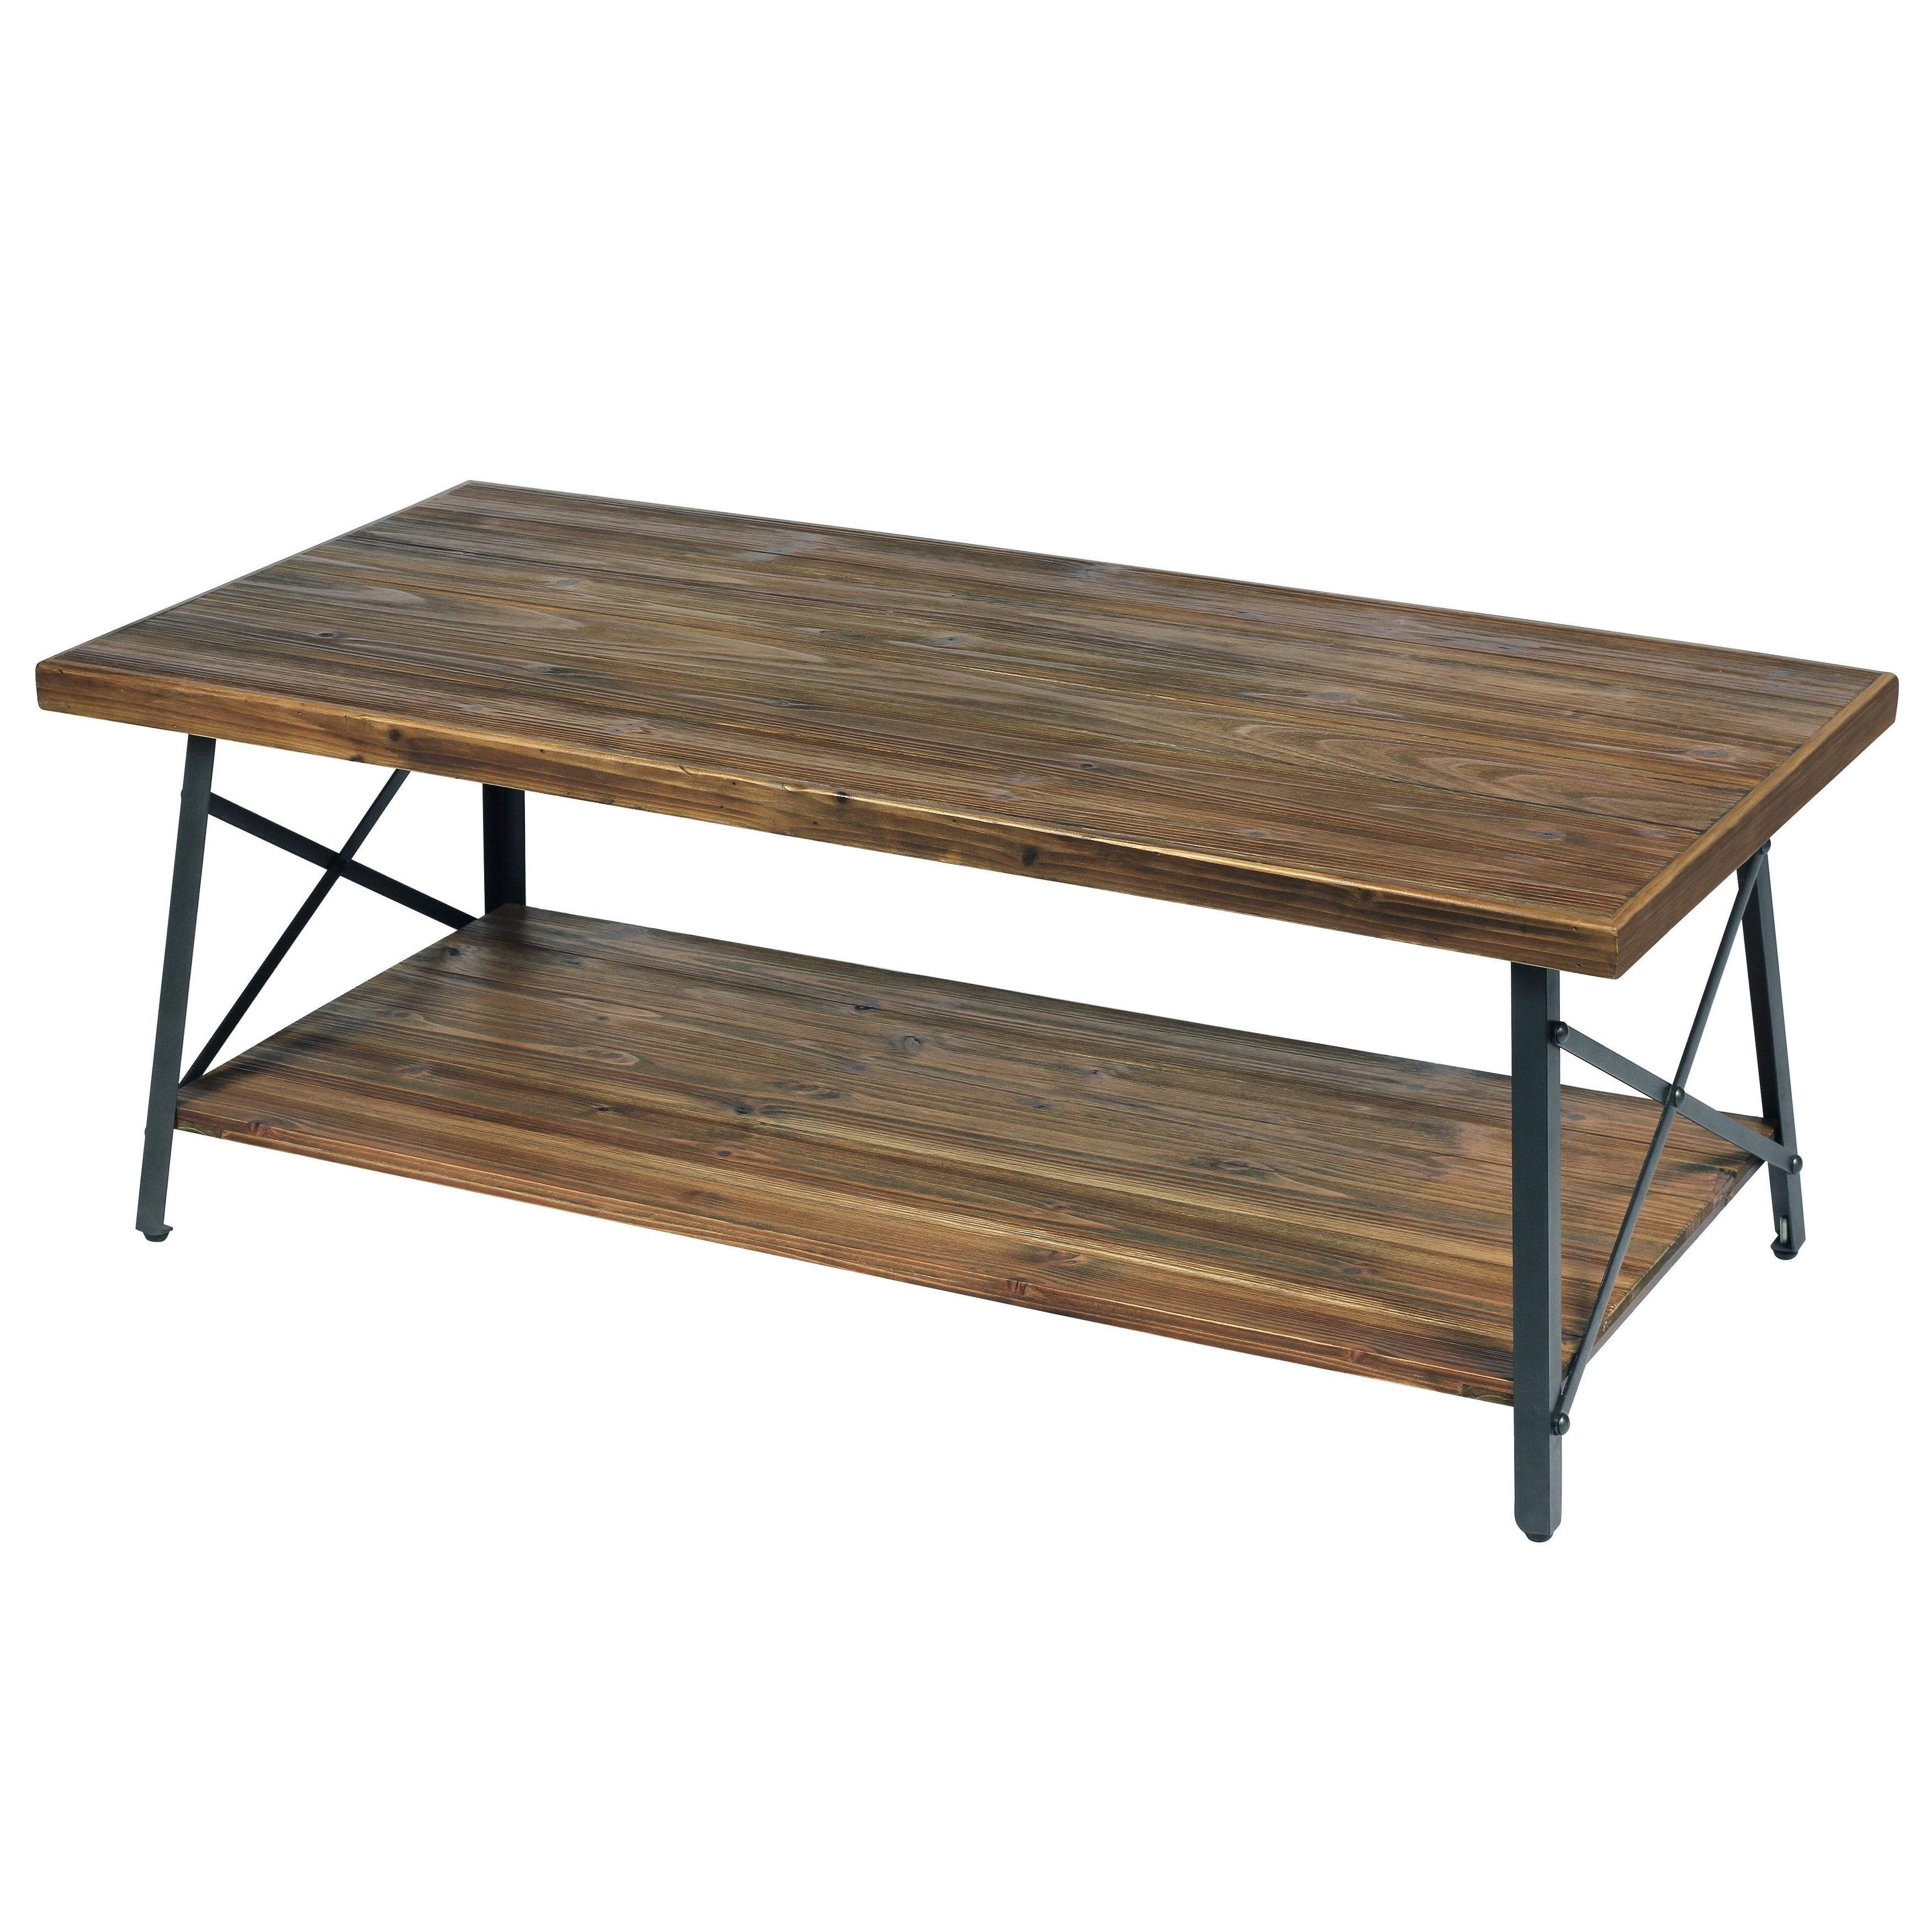 Carbon Loft Oliver Modern Rustic Natural Fir Coffee Table For Favorite Carbon Loft Kenyon Natural Rustic Coffee Tables (View 11 of 20)